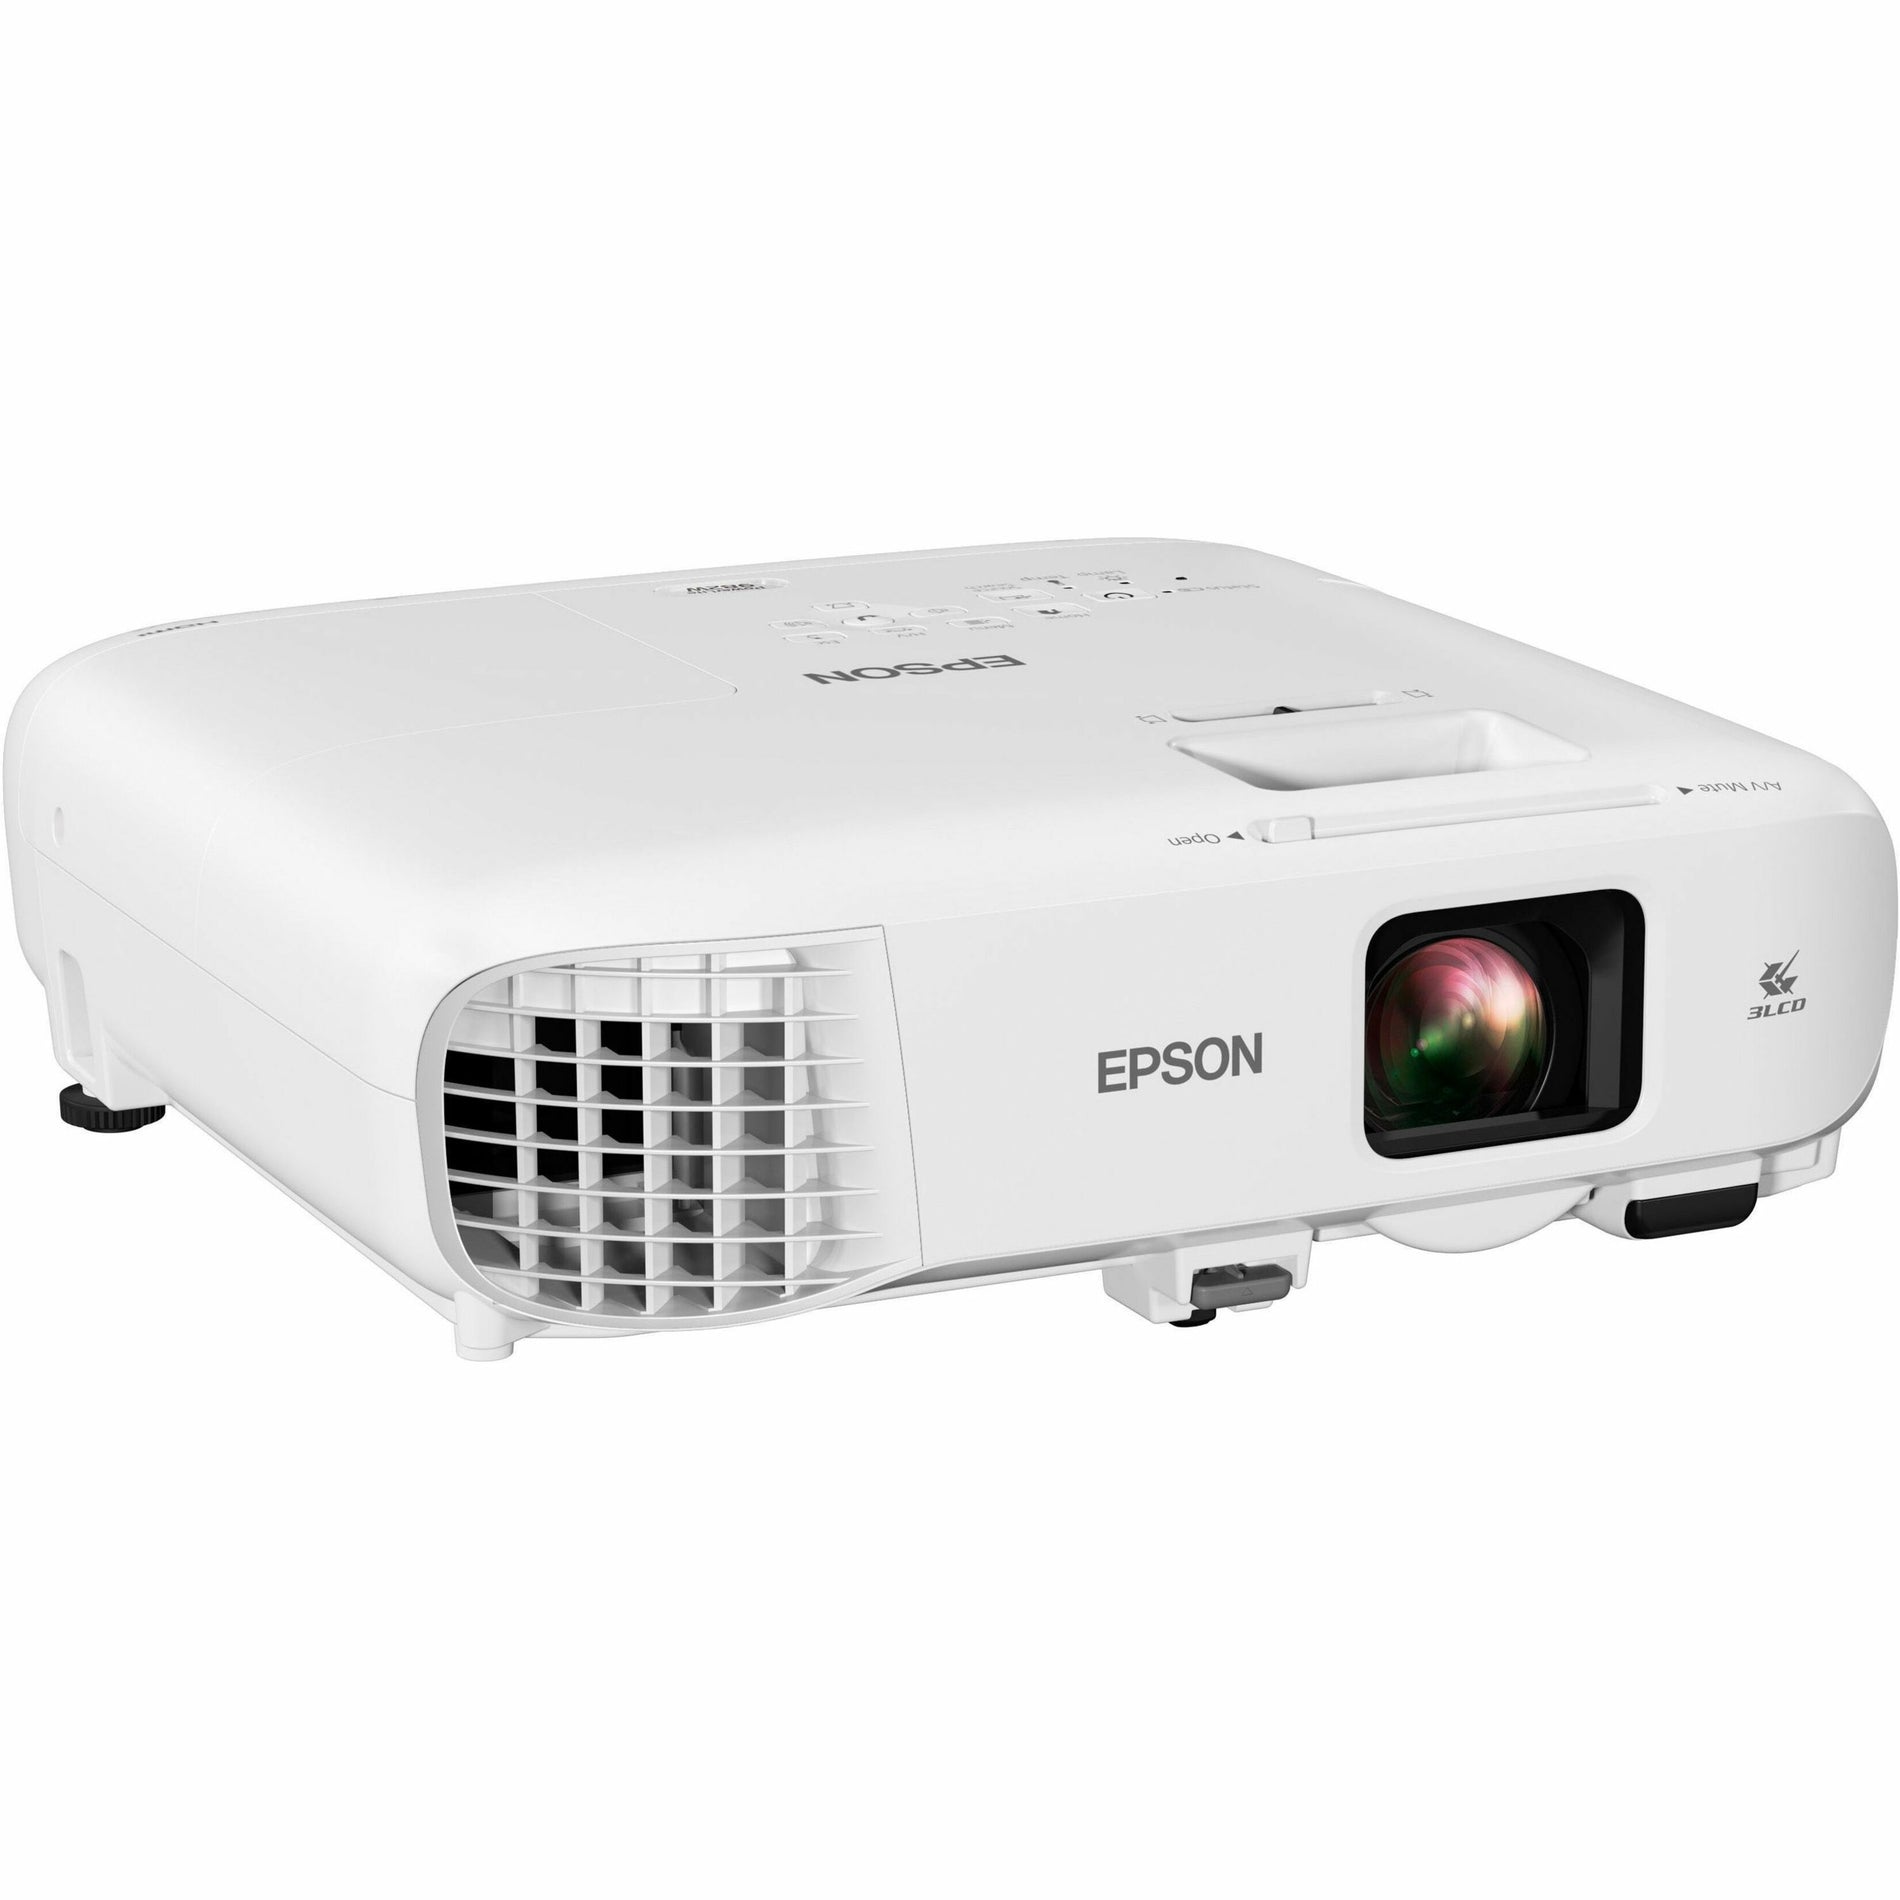 Epson V11H987020 PowerLite 982W 3LCD WXGA Classroom Projector with Dual HDMI, 4200 lm, 16:10